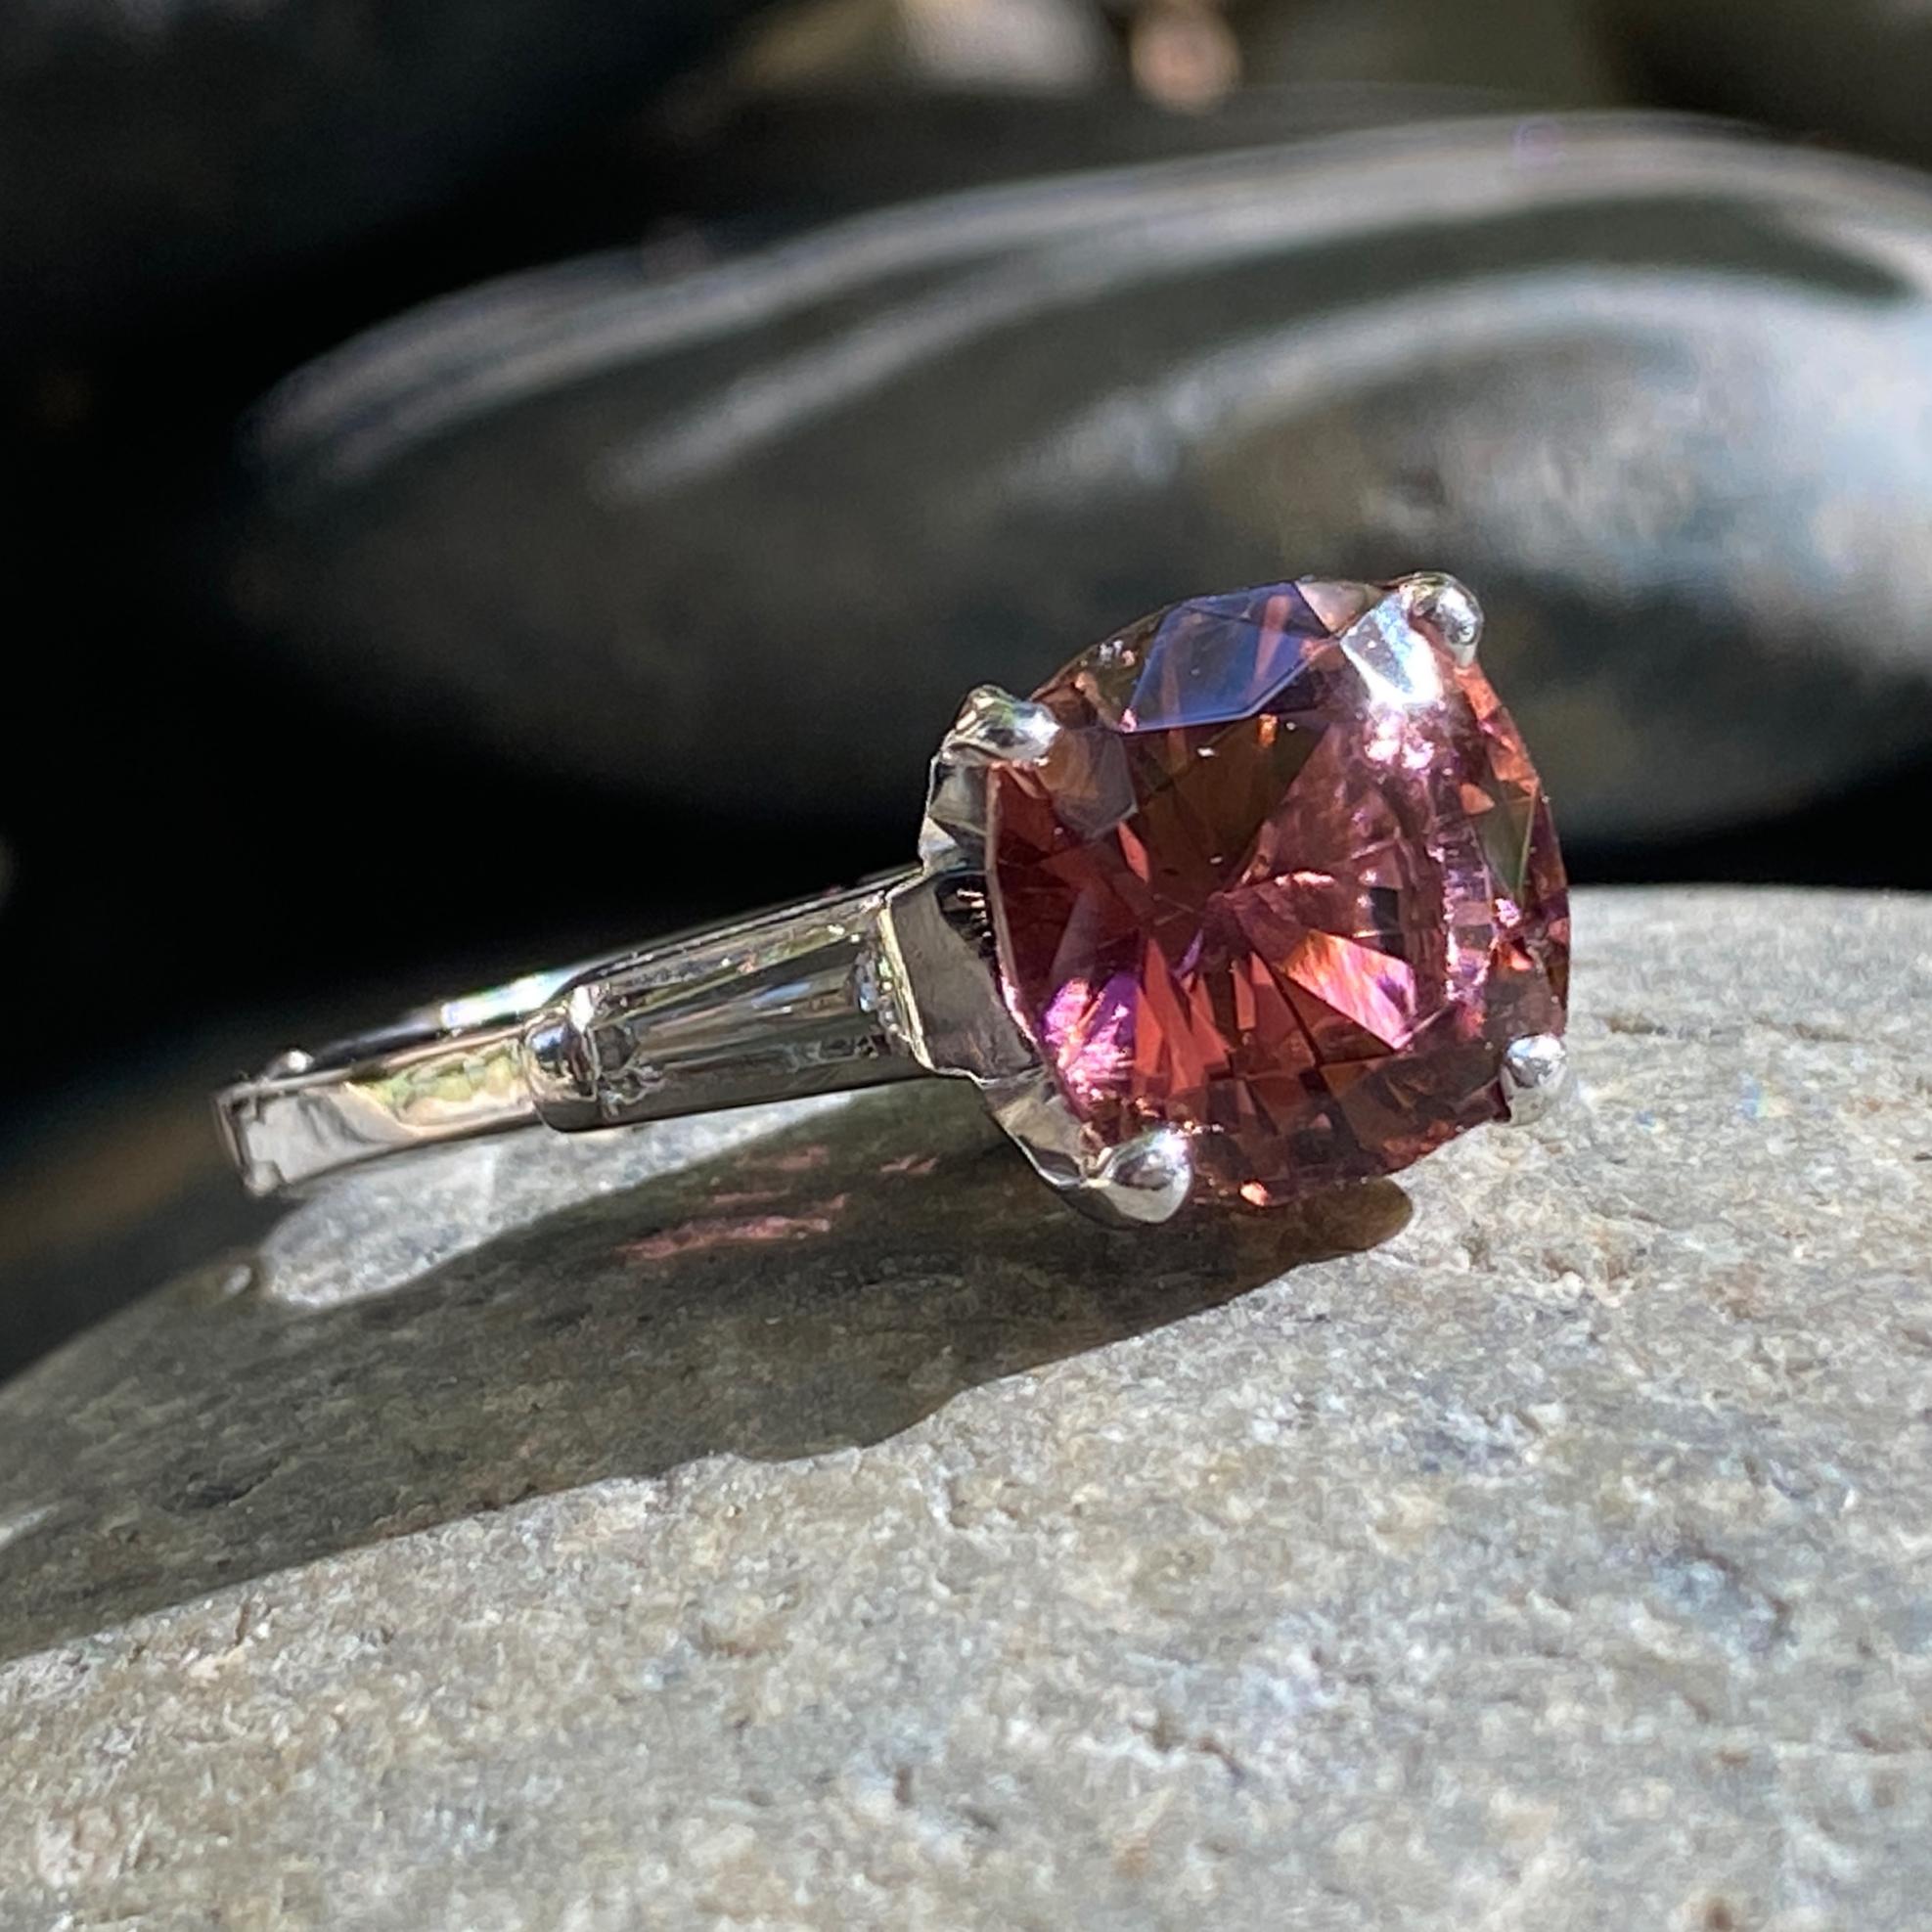 2.9 Carat Pink Tourmaline Engagement Ring with Baguettes in Platinum & Gold In Excellent Condition For Sale In Sherman Oaks, CA